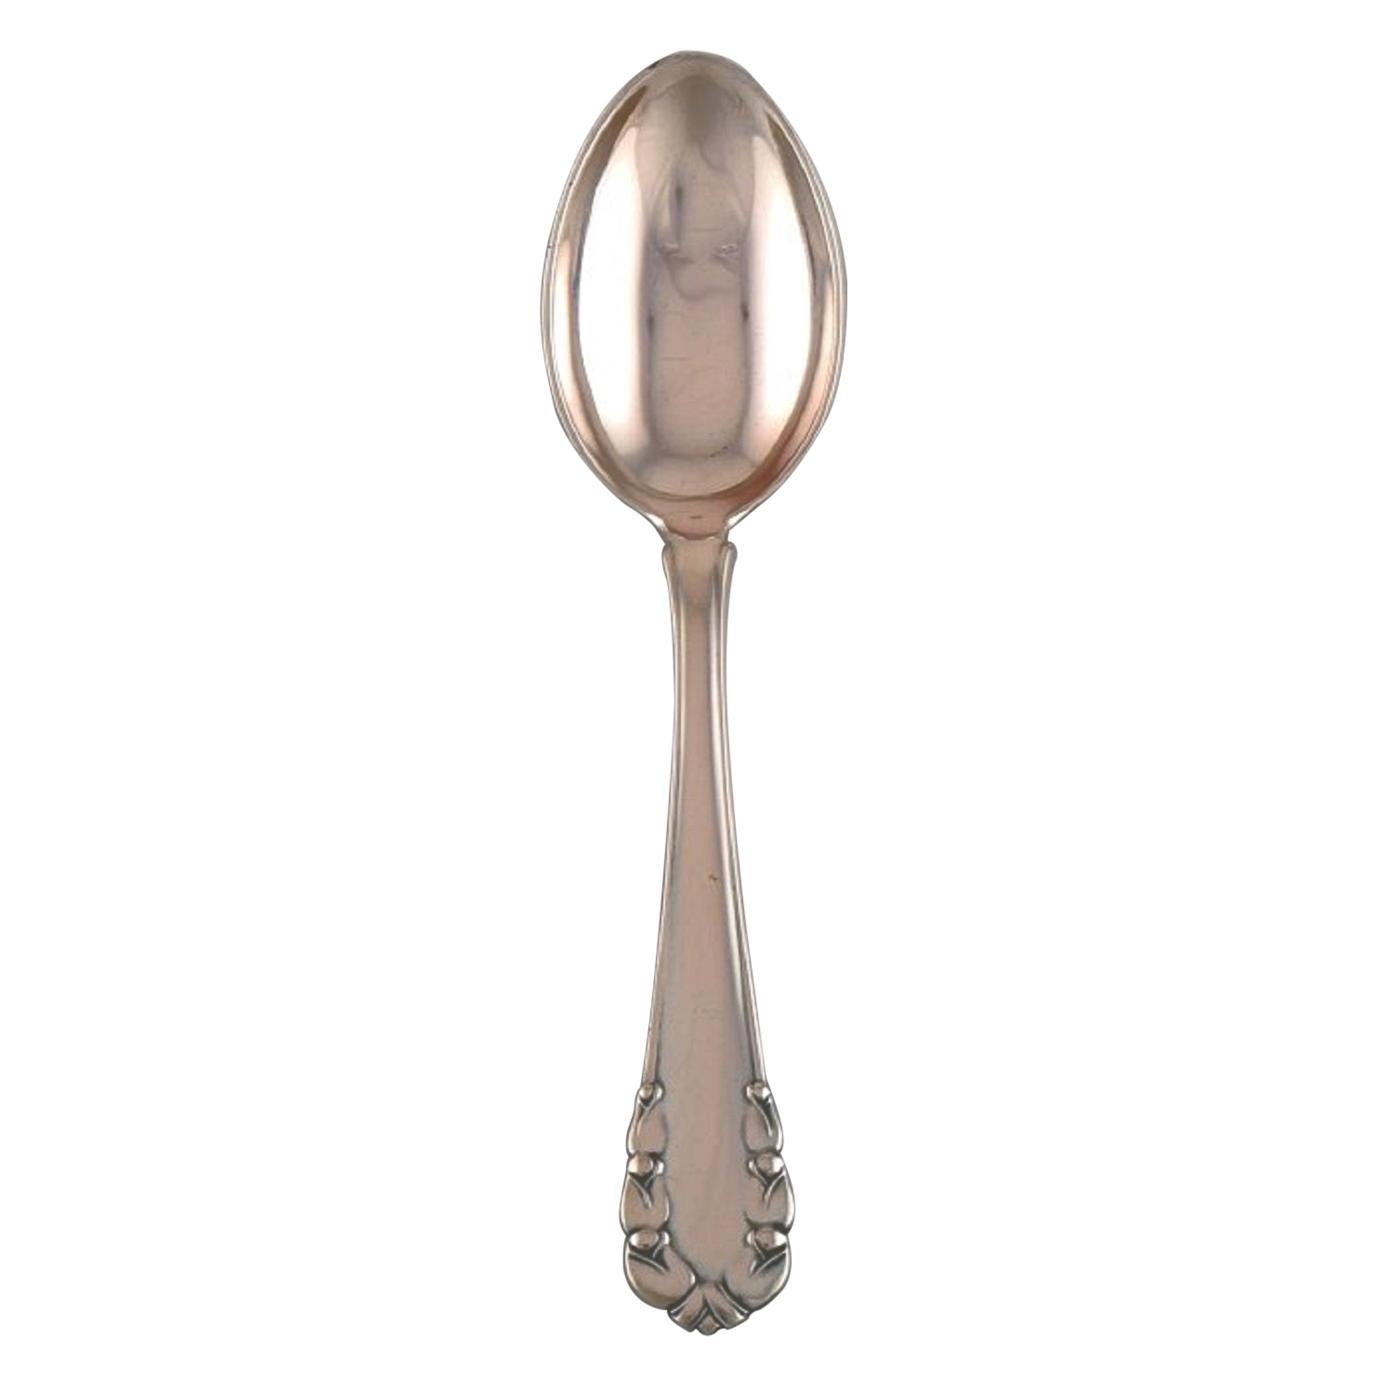 Georg Jensen Lily of the Valley Sterling Silver Dessert Spoon, Dated 1915-1930